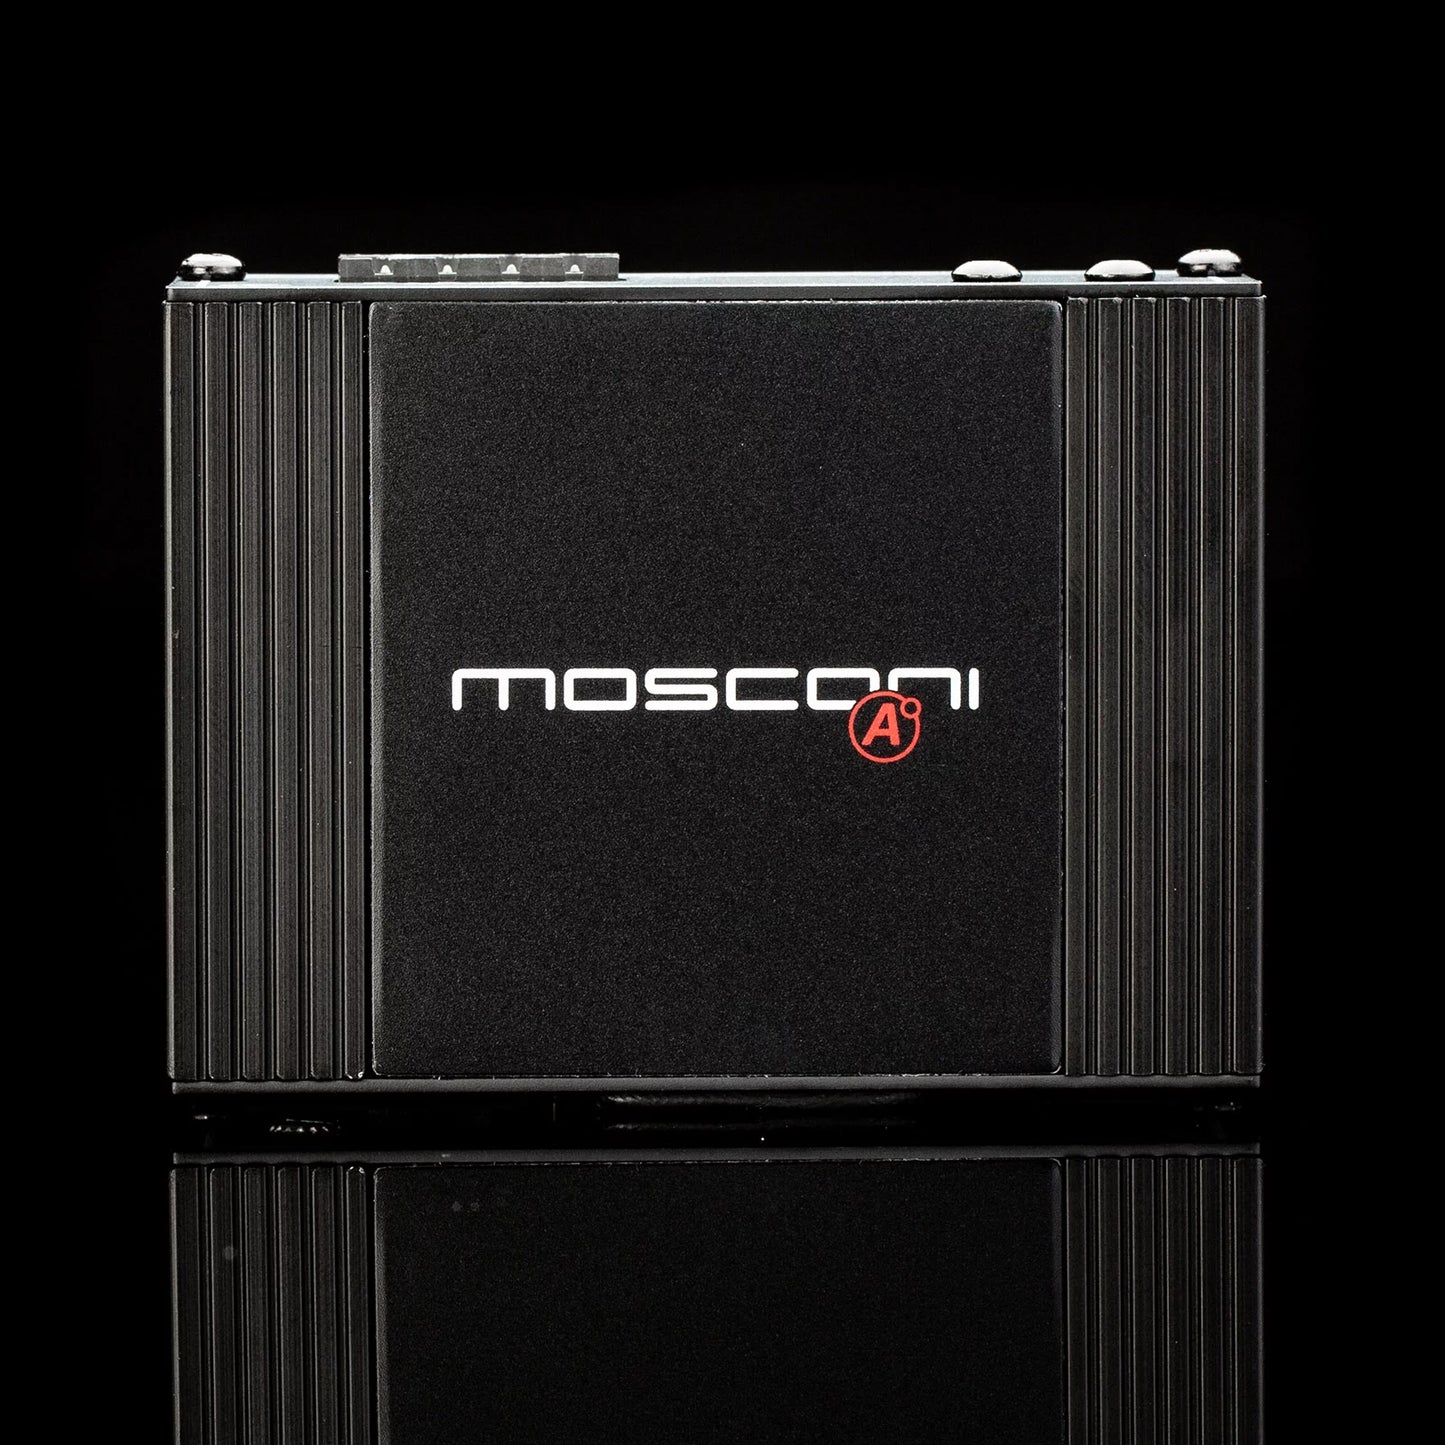 MOSCONI ATOMO 1 CLASS-D 1-CHANNEL AMPLIFIER